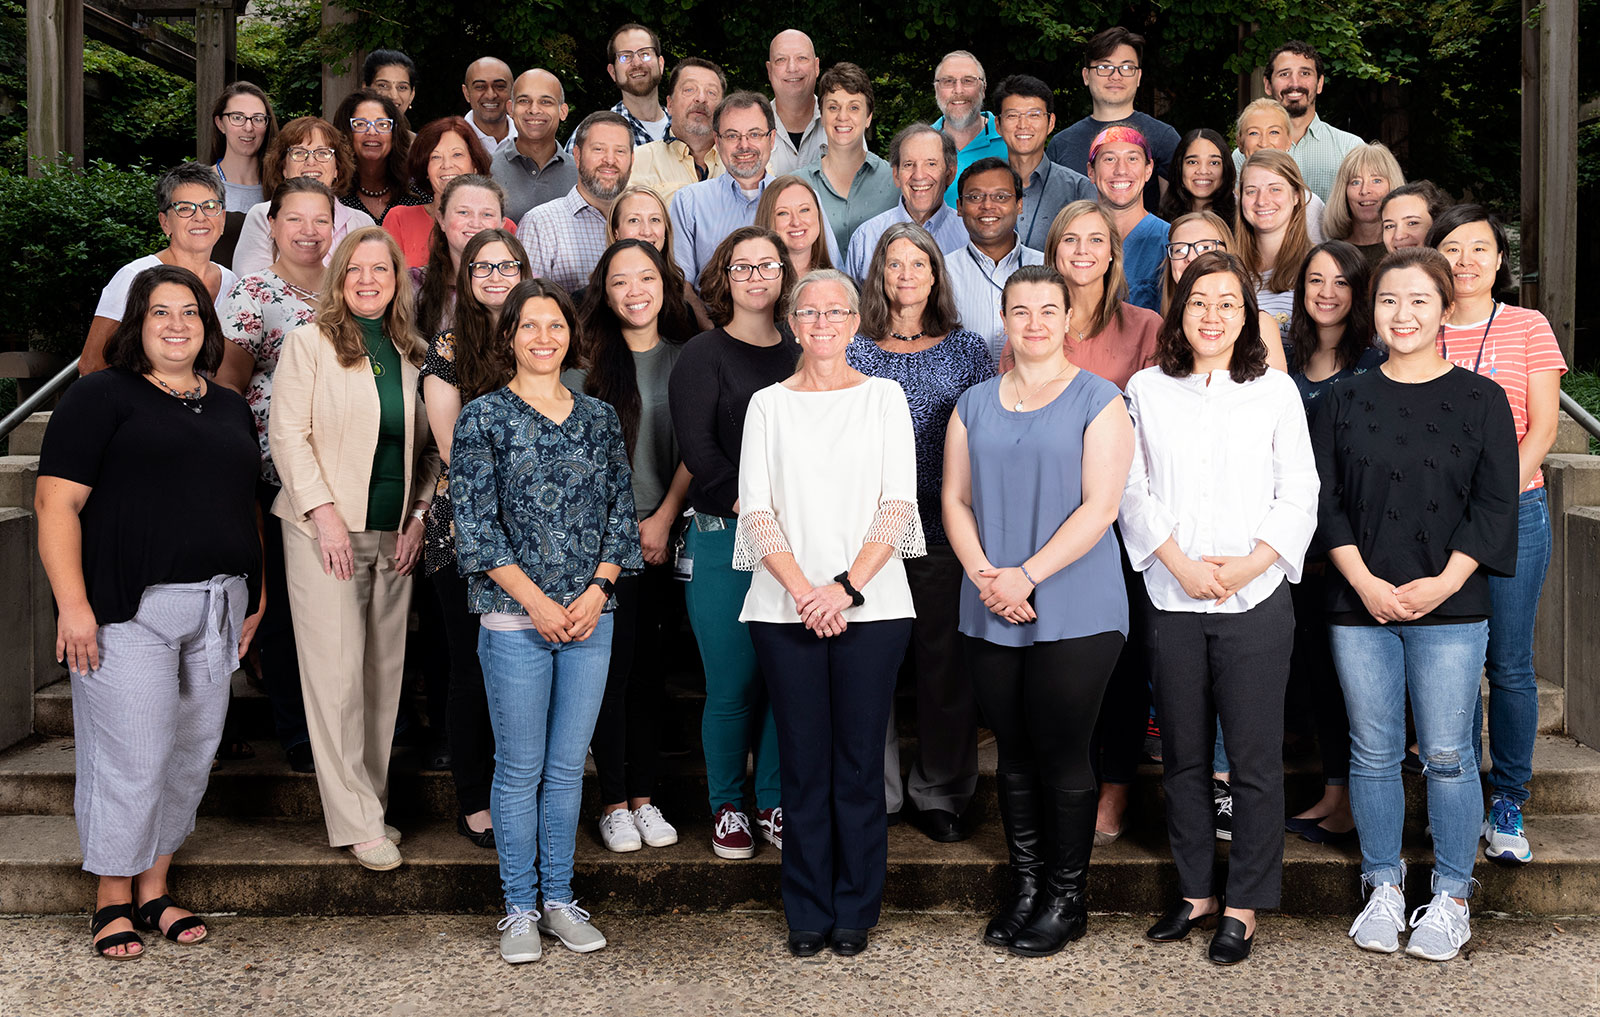 Faculty, staff and students in the Department of Neural and Behavioral Sciences at Penn State College of Medicine are pictured standing in a large group outdoors in 2019.